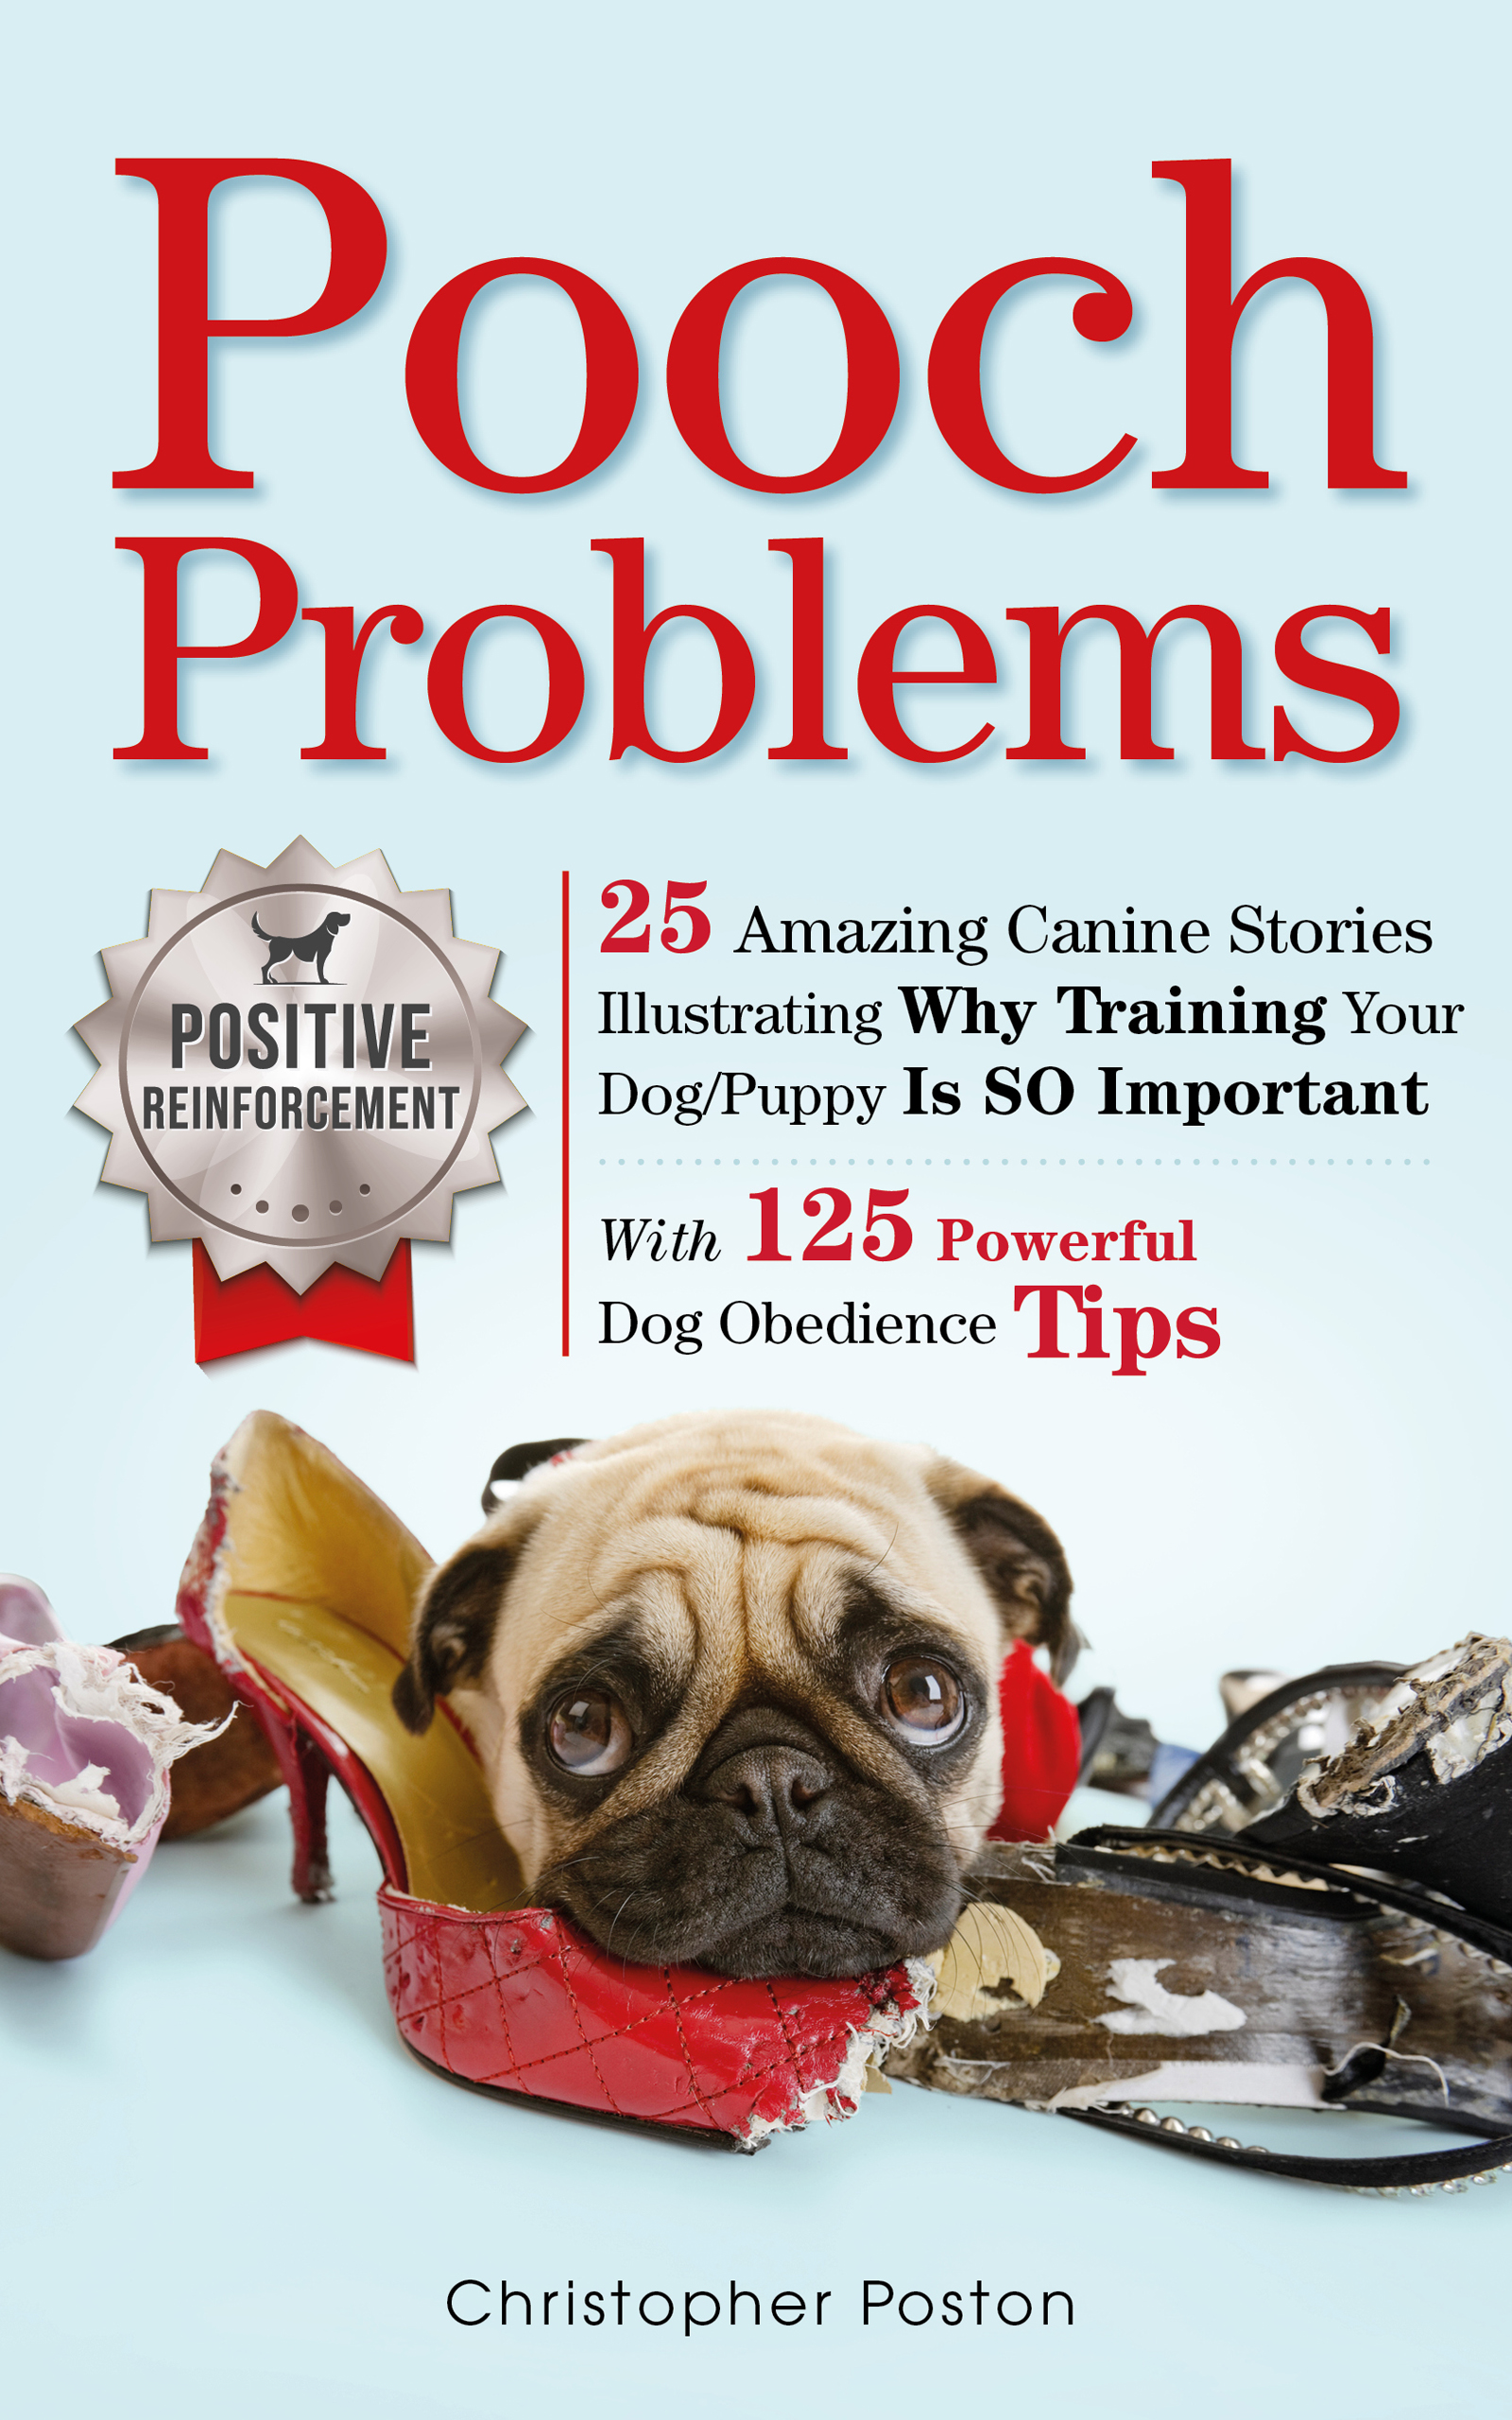 FREE: Pooch Problems by Christopher Poston